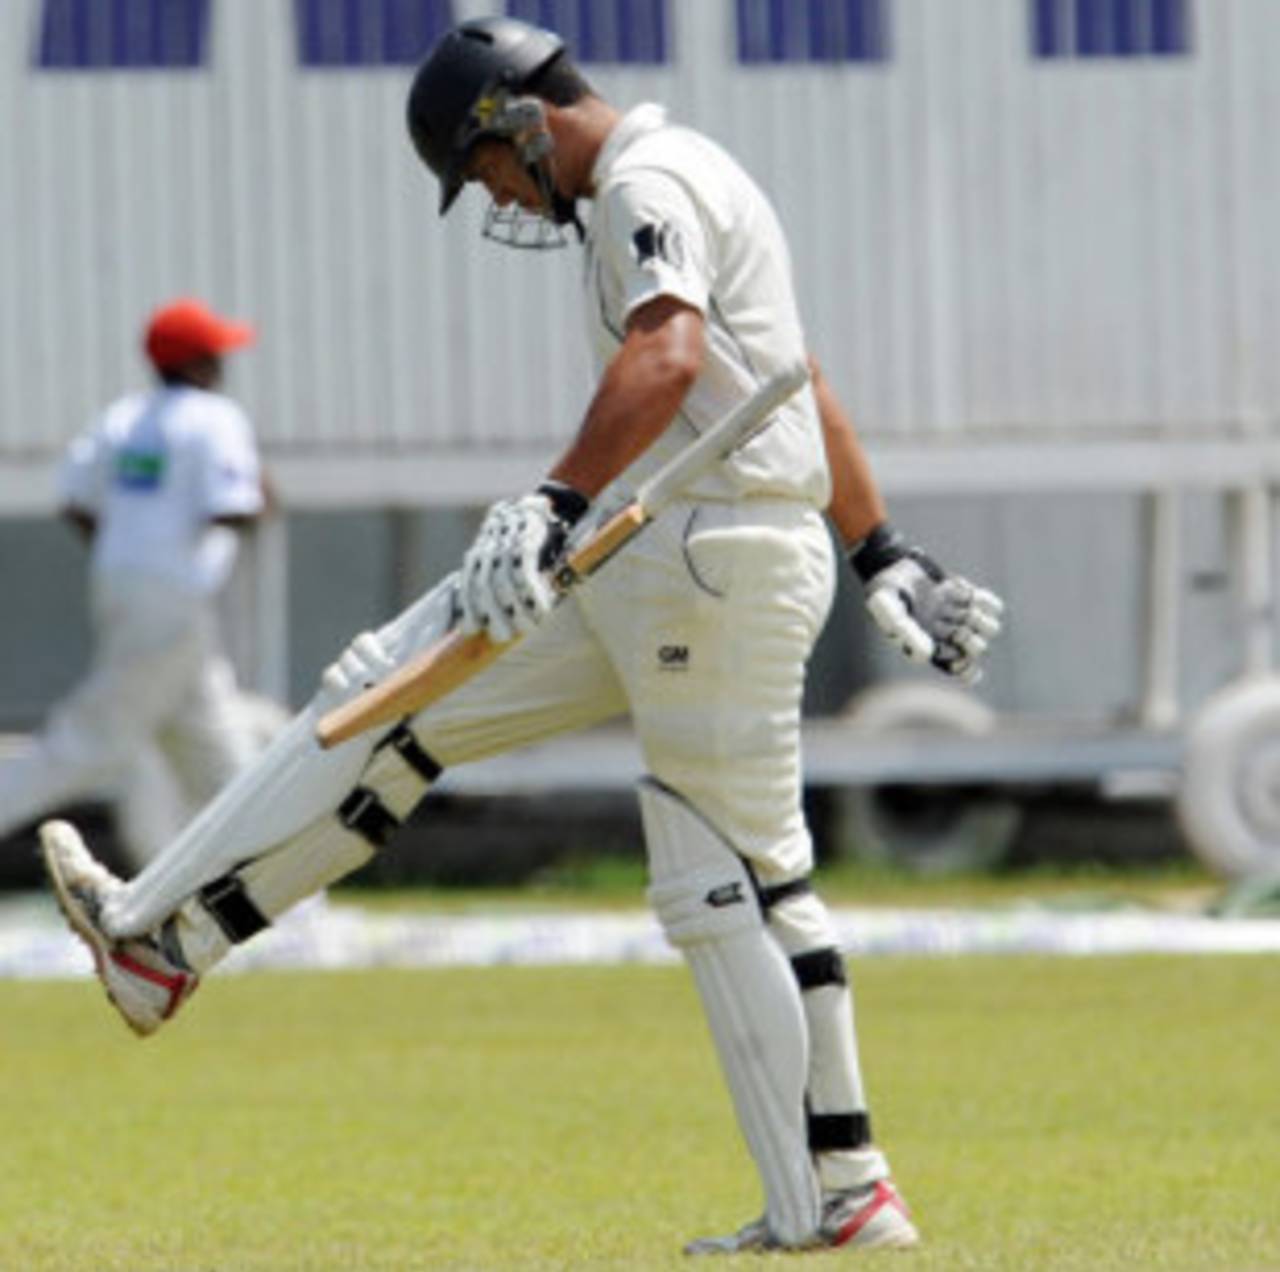 Ross Taylor shows his frustration after being caught-behind, Sri Lanka v New Zealand, 2nd Test, SSC, Colombo, 3rd day, August 28, 2009 